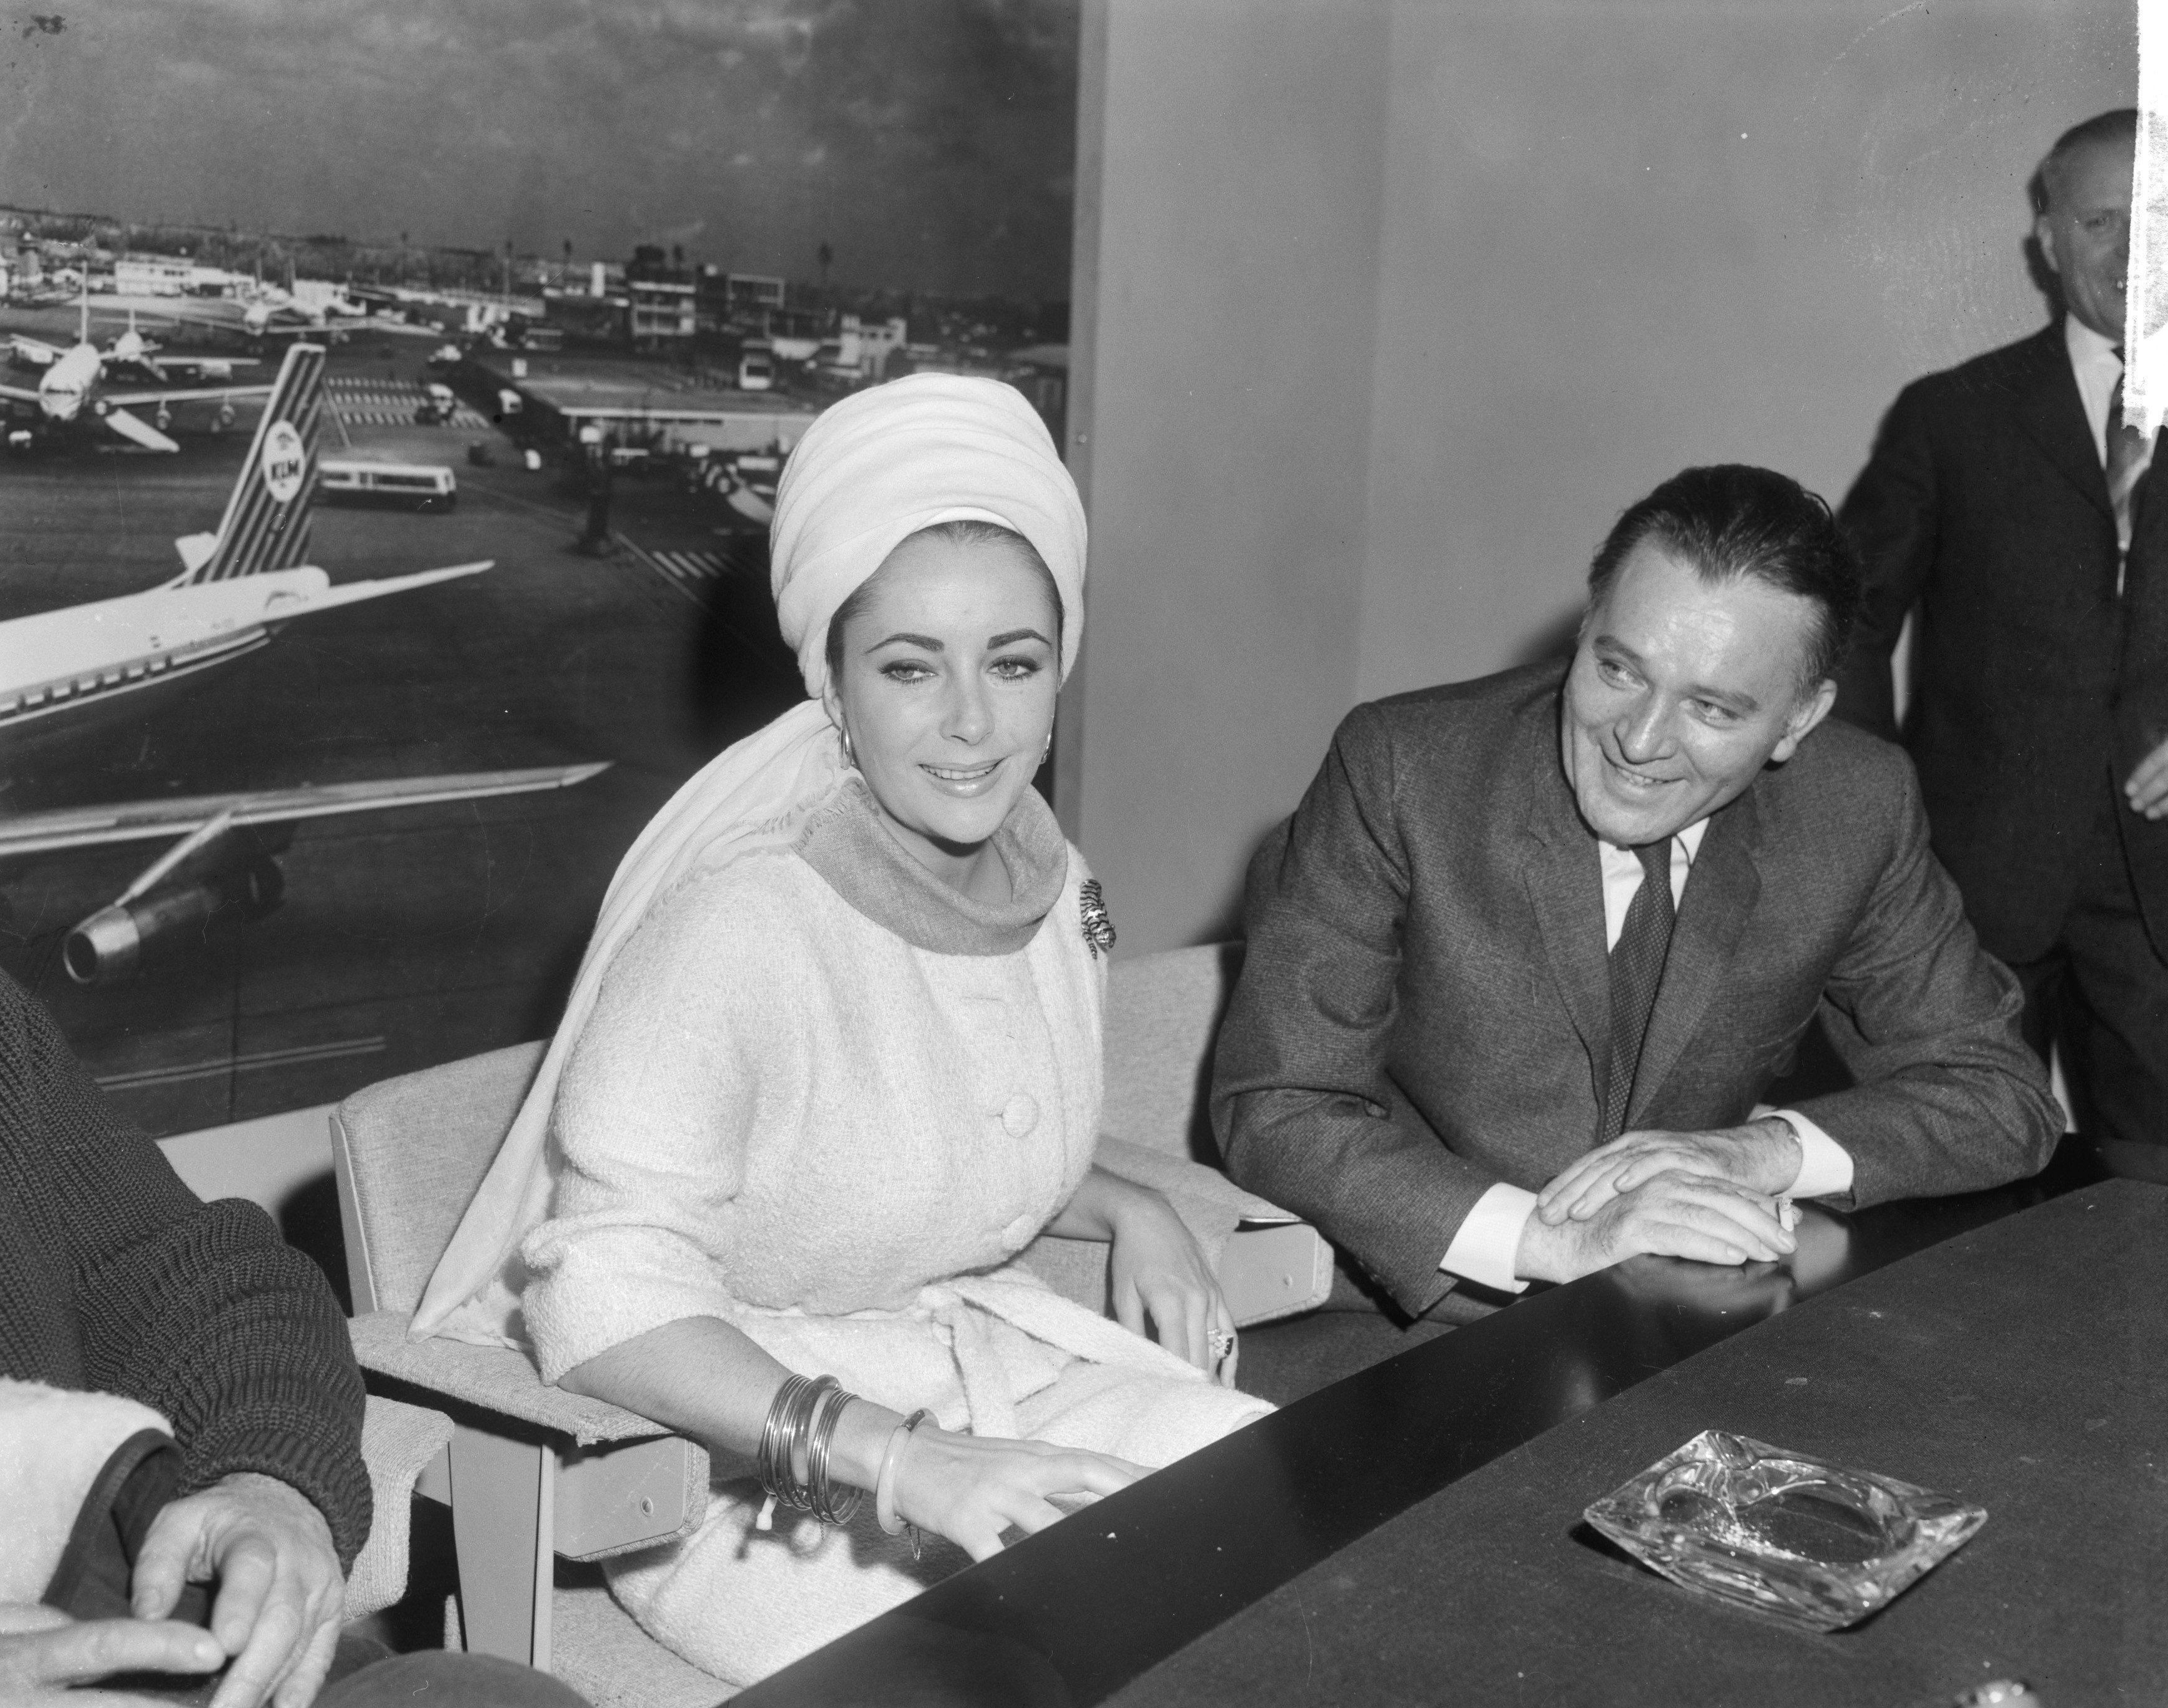 Elizabeth Taylor and Richard Burton during press conference at Schiphol for "The Spy Who Came In From The Cold." | Source : Wikimedia Commons